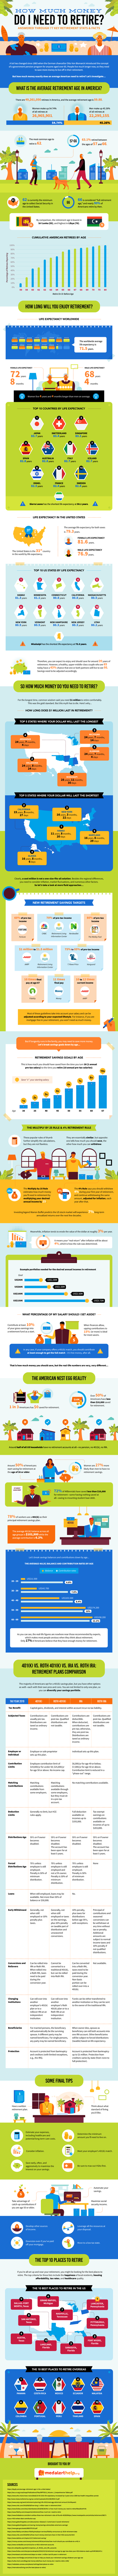 How Much Money Do I Need to Retire Infographic